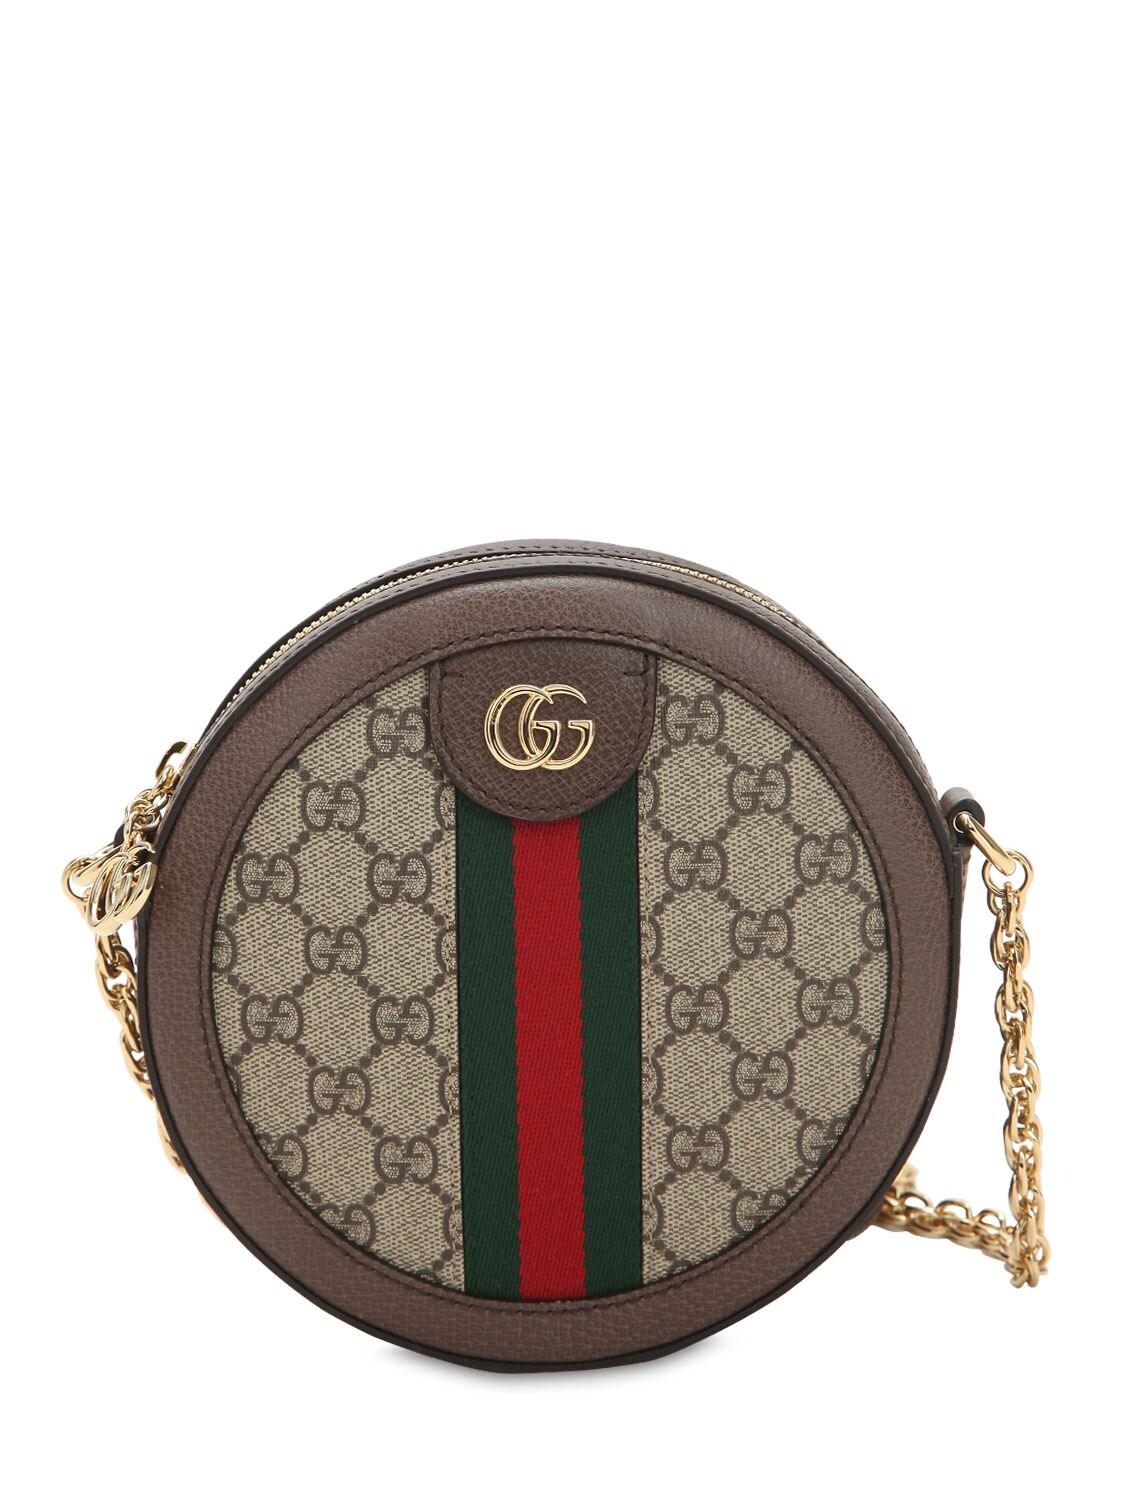 Gucci Ophidia Mini Round Shoulder Bag in Brown - Save 34% - Lyst